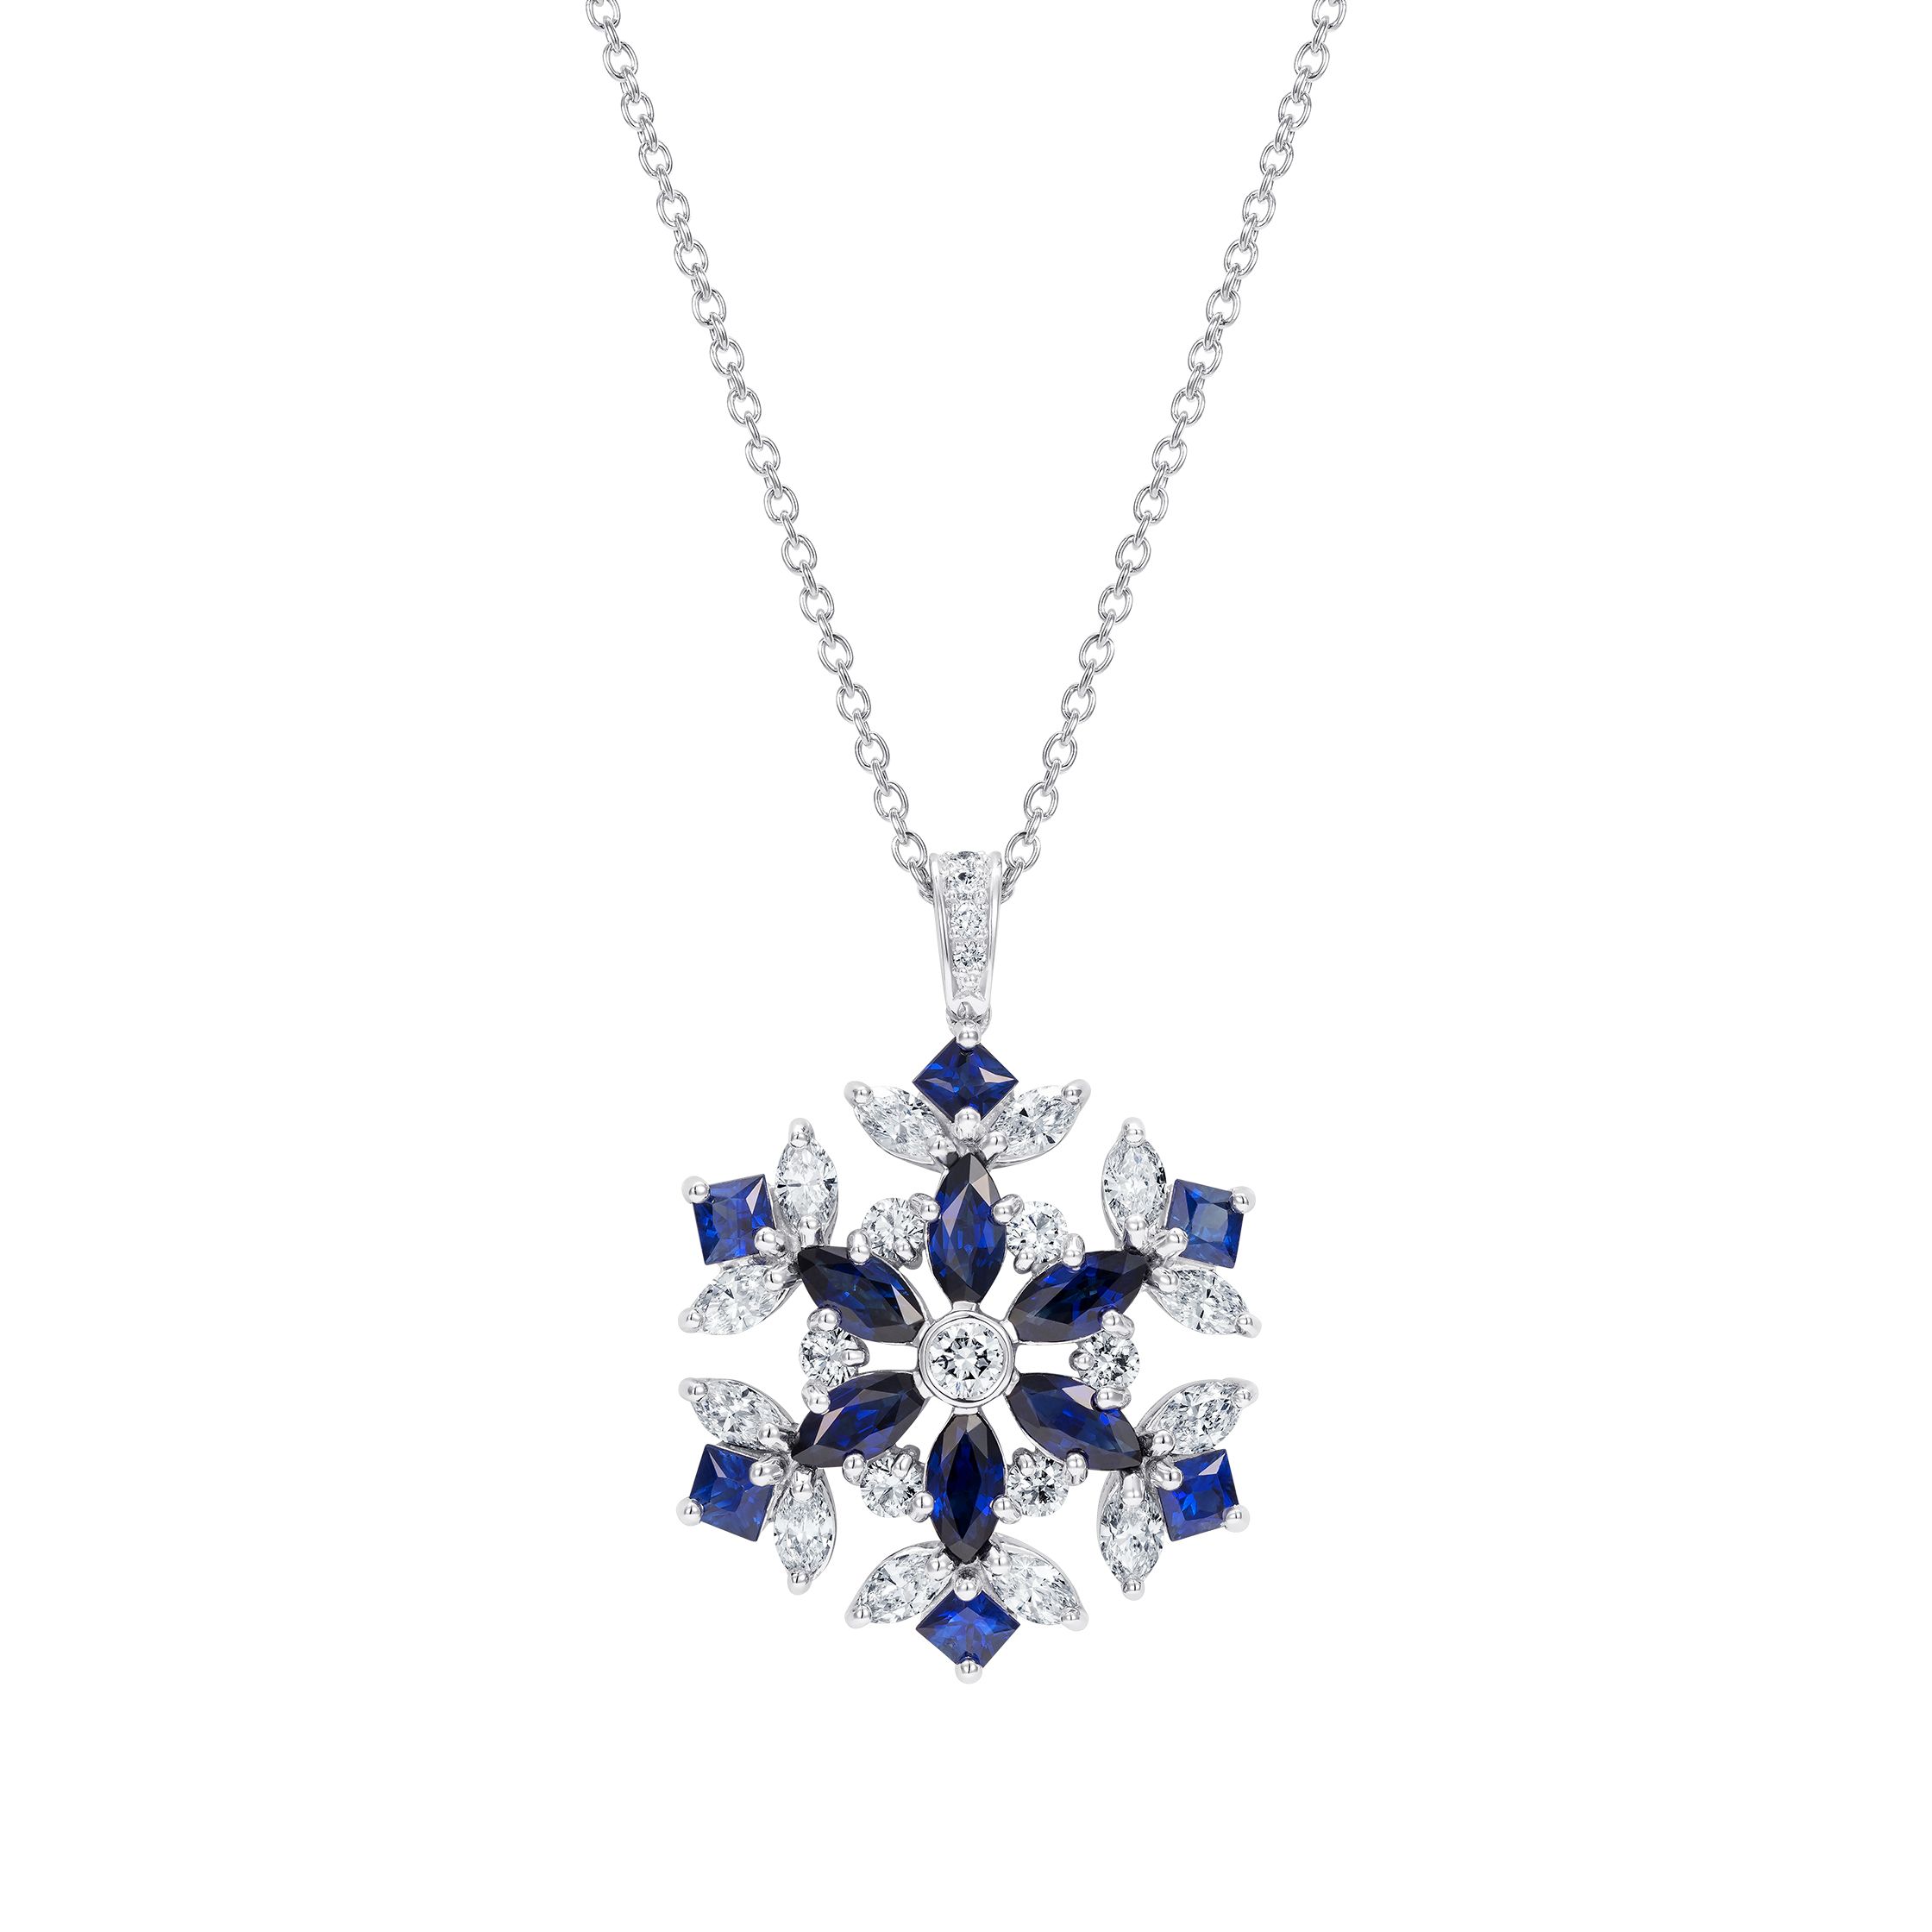 Stowe Strong Mixed Cut Diamond Snowflake Pendant With 18